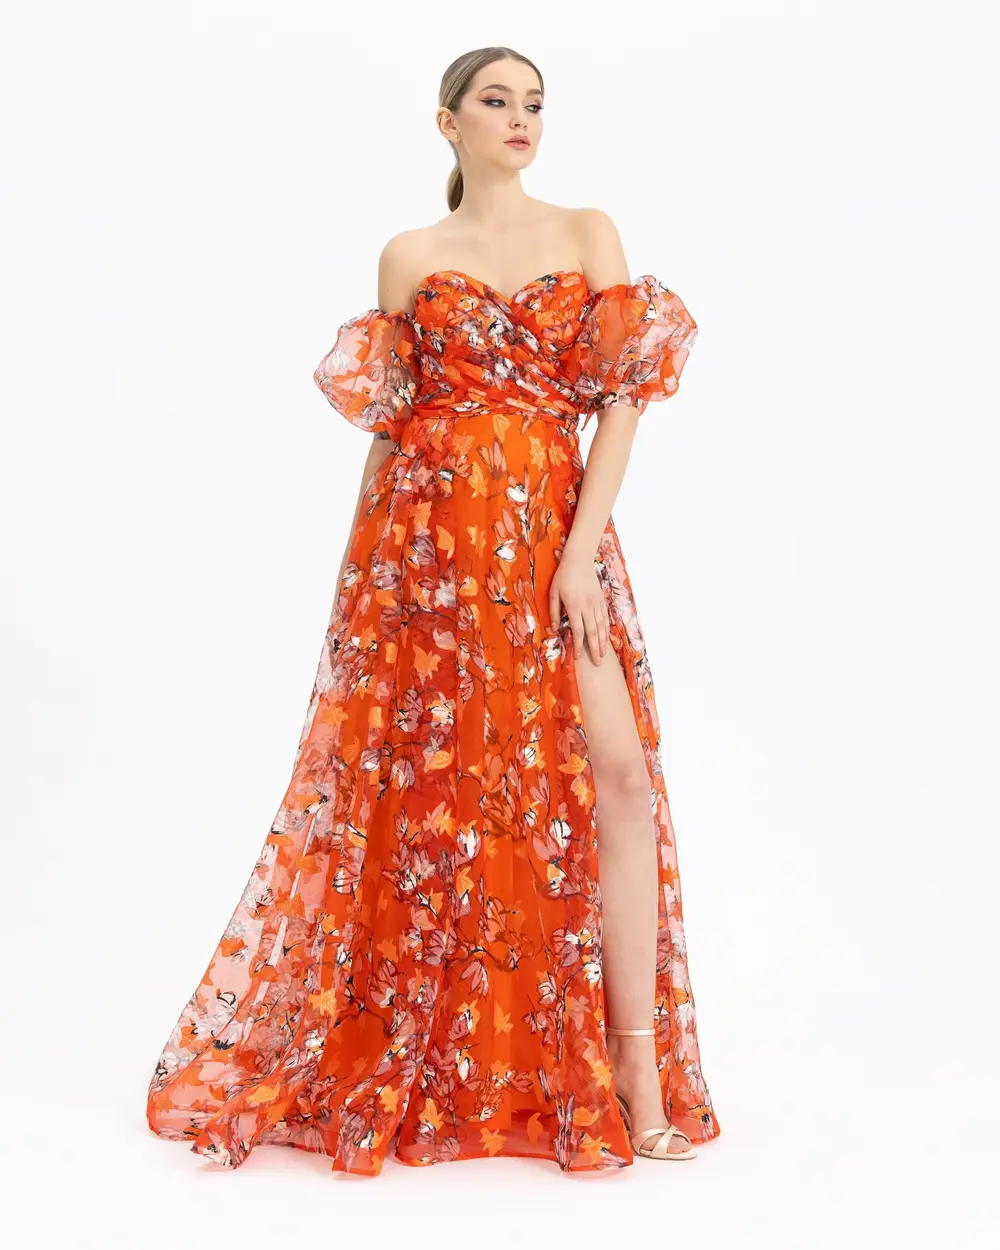  FLORAL PATTERNED EVENING DRESS WITH BALLOON SLEEVES